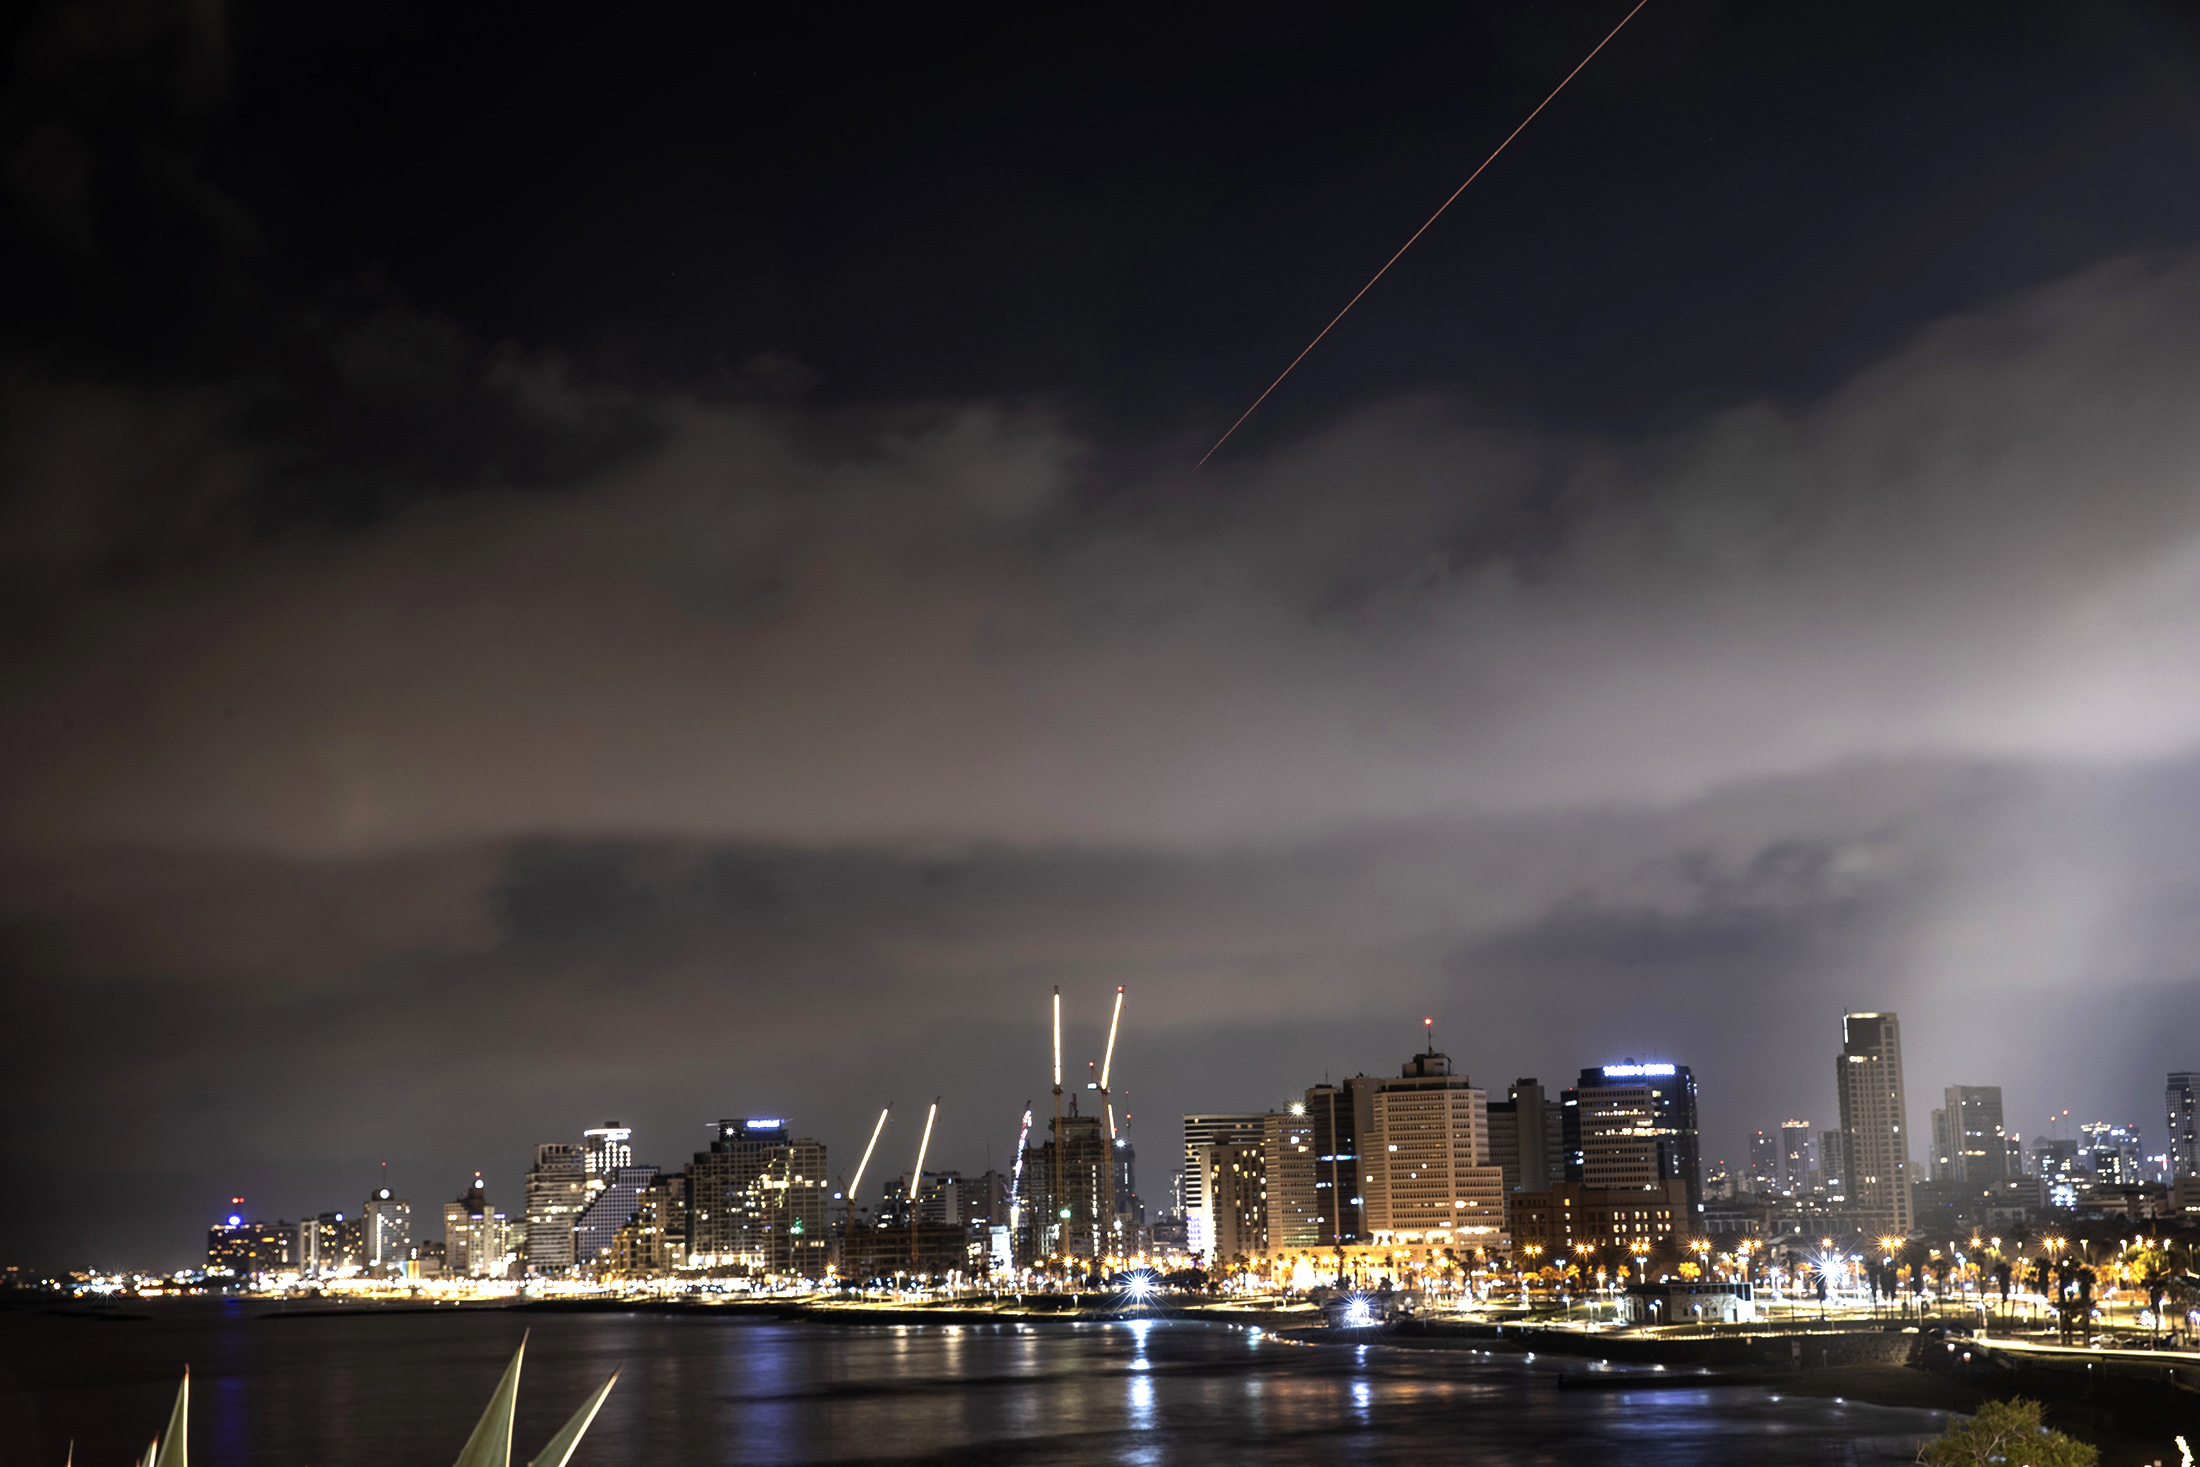 Explosions over the skies of Tel Aviv, following the attack from Iran on April 14.